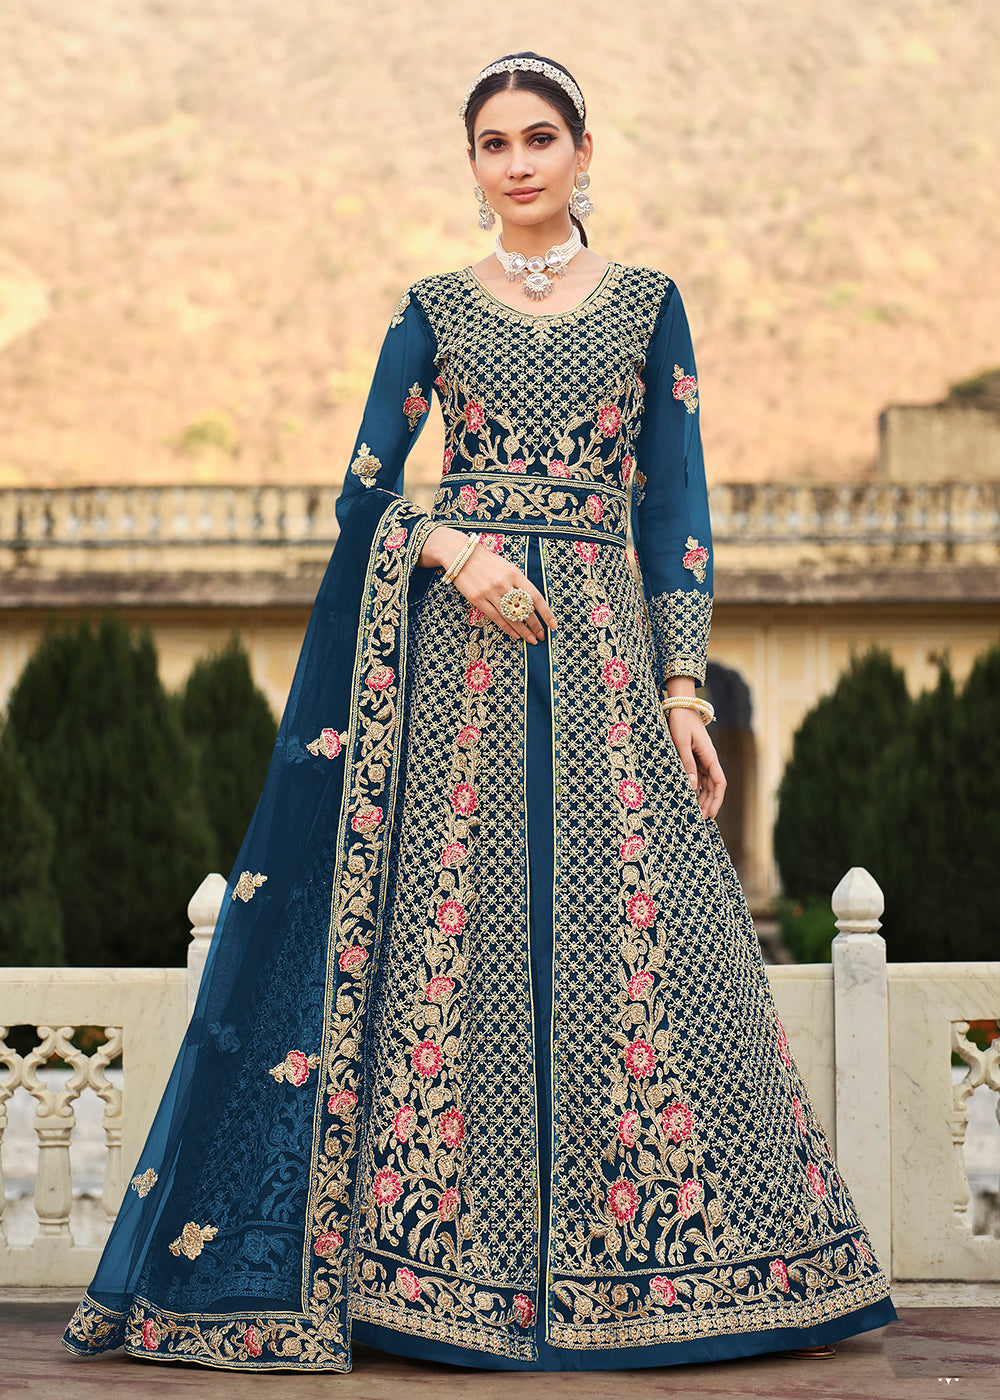 Buy Now Special Cord & Stone Work Dusty Blue Slit Style Anarkali Suit Online in USA, UK, Australia, New Zealand, Canada, Italy & Worldwide at Empress Clothing. 